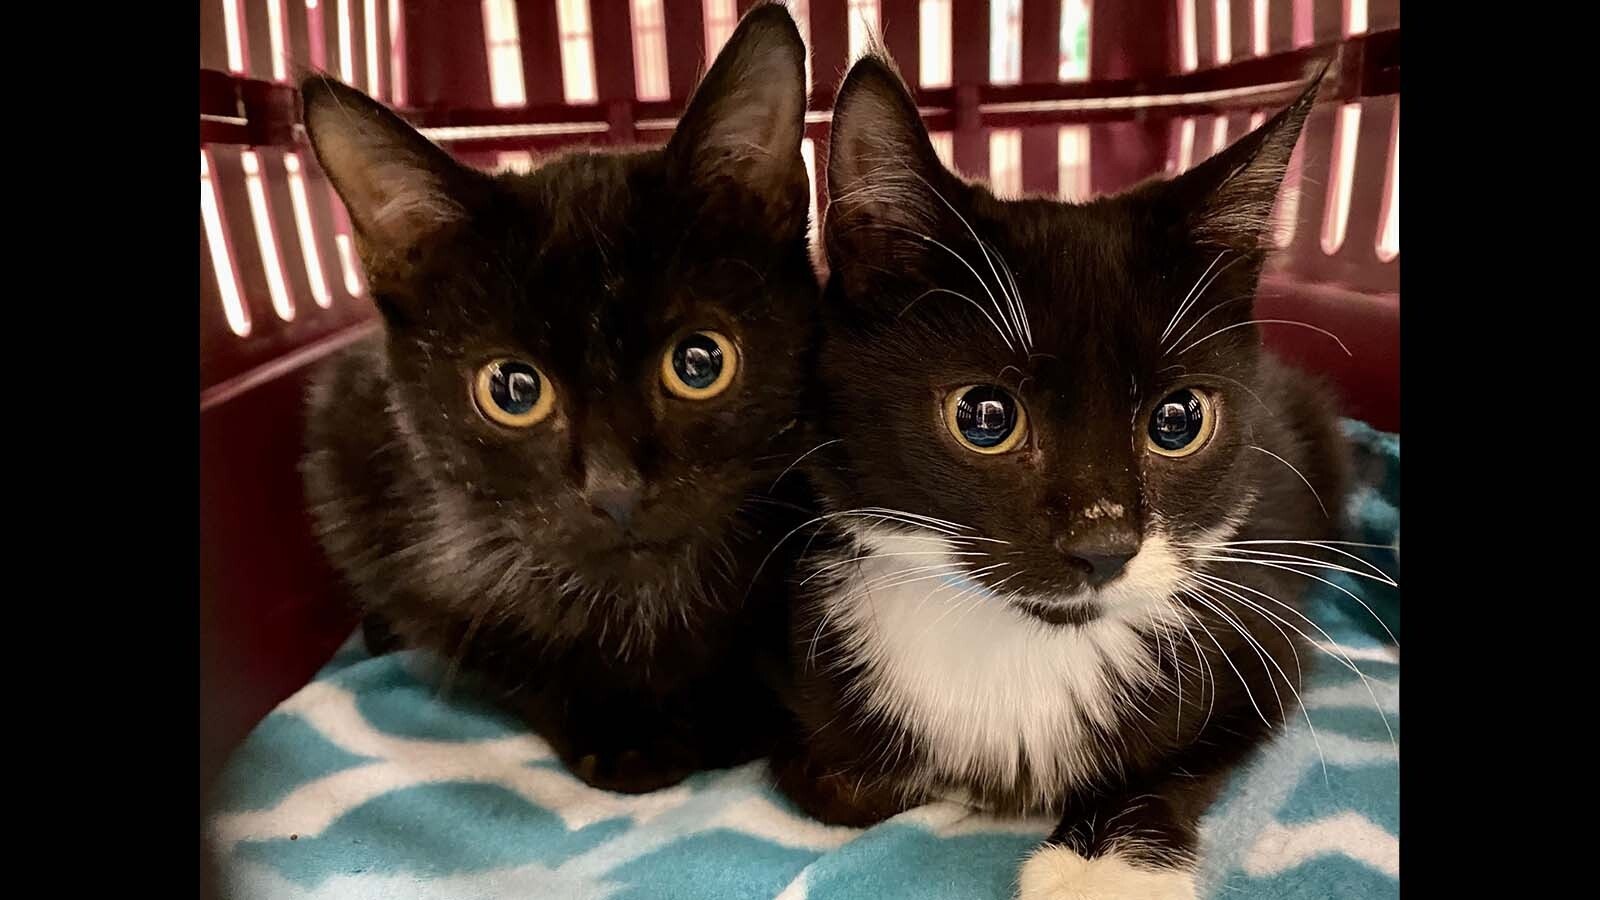 After rounding up 22 cats from a hoarded home, the Cheyenne Animal Shelter is bursting with them. They're having a 2-for-1 adoption special on kittens.